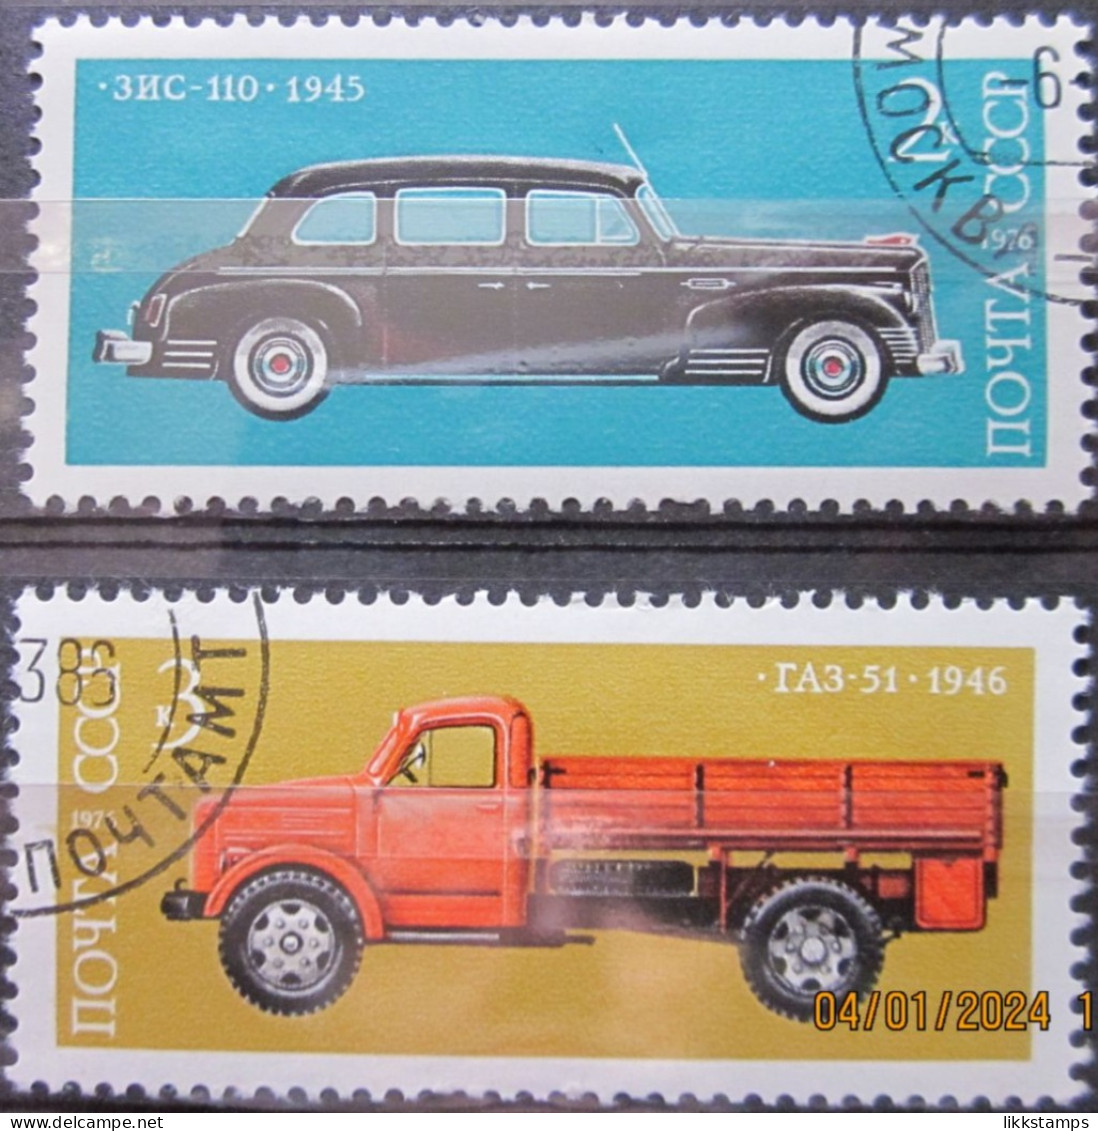 RUSSIA ~ 1976 ~ S.G. NUMBERS 4512 - 4513. ~ MOTOR VEHICLES. ~ VFU #03582 - Usados